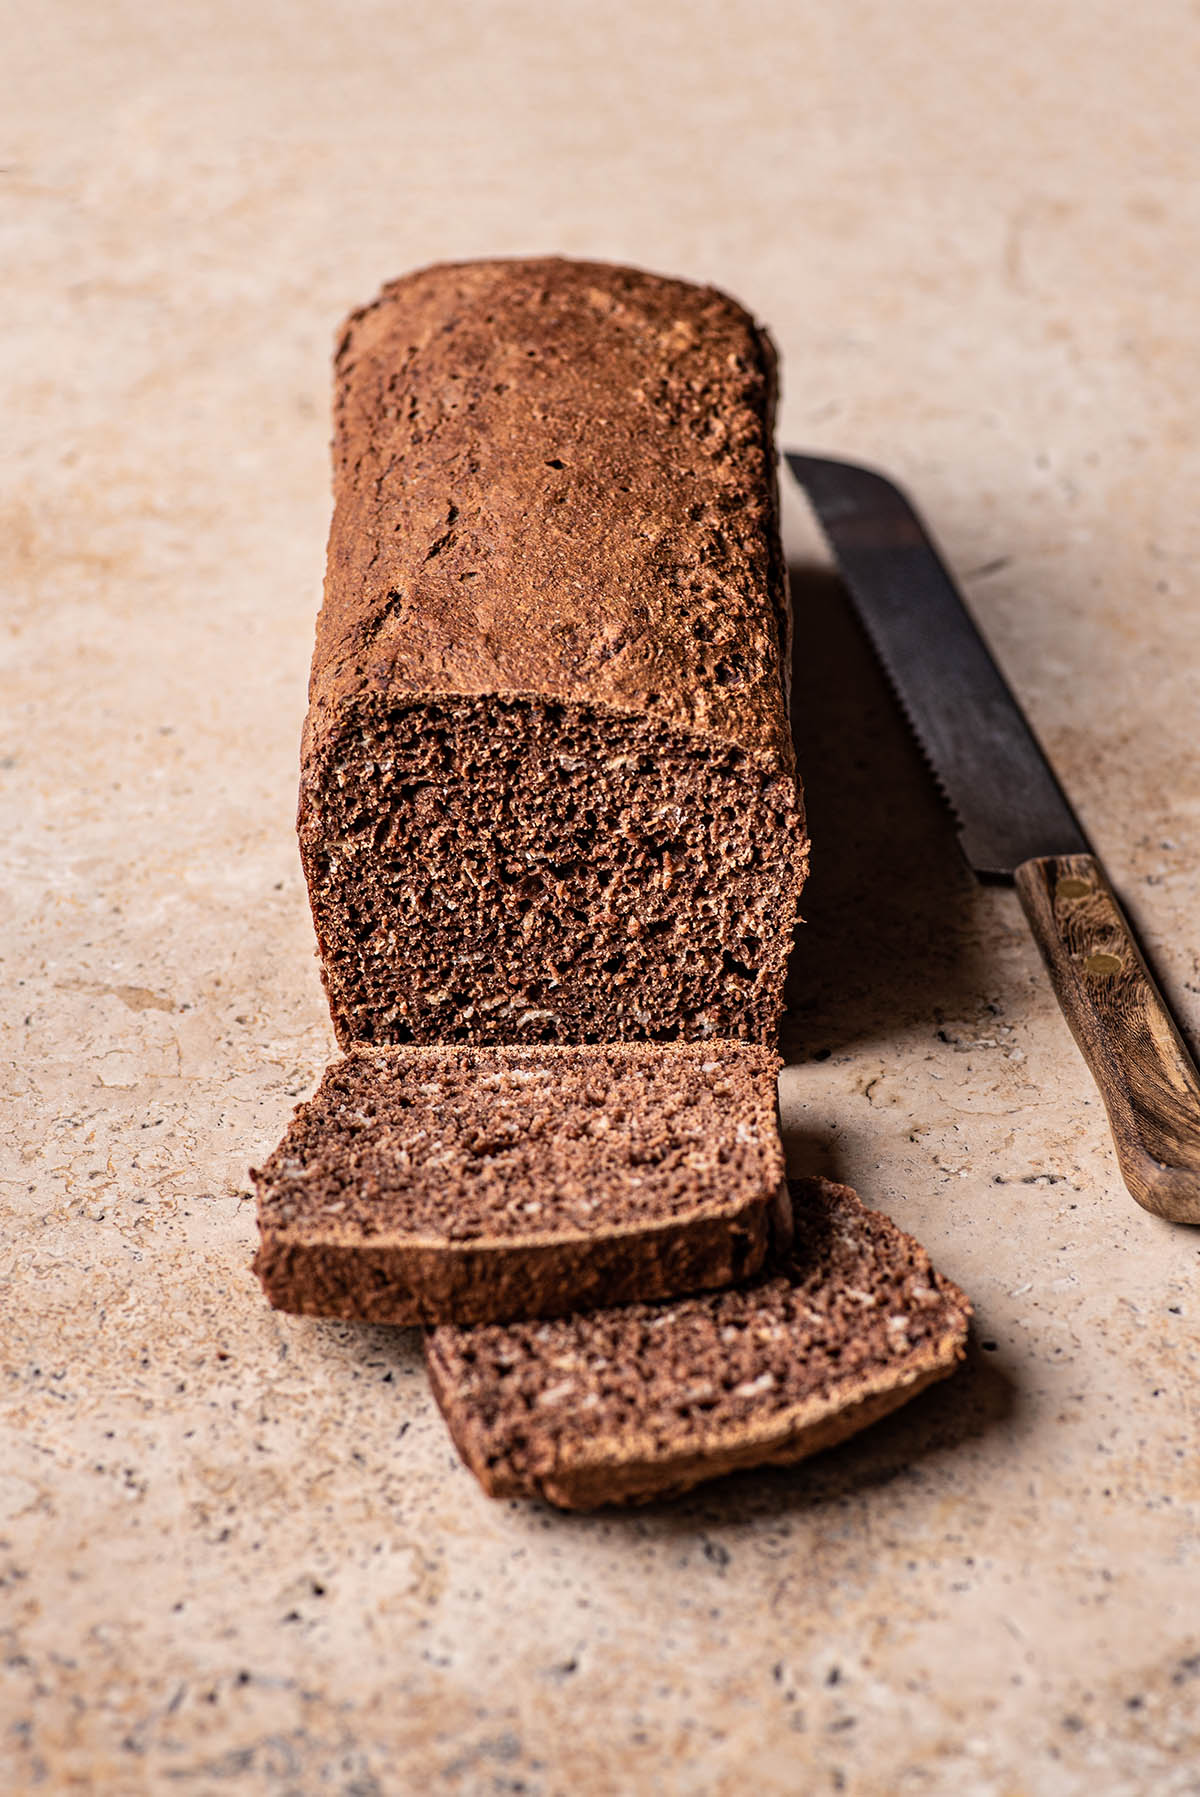 A loaf of dark rye bread with two slices cut.